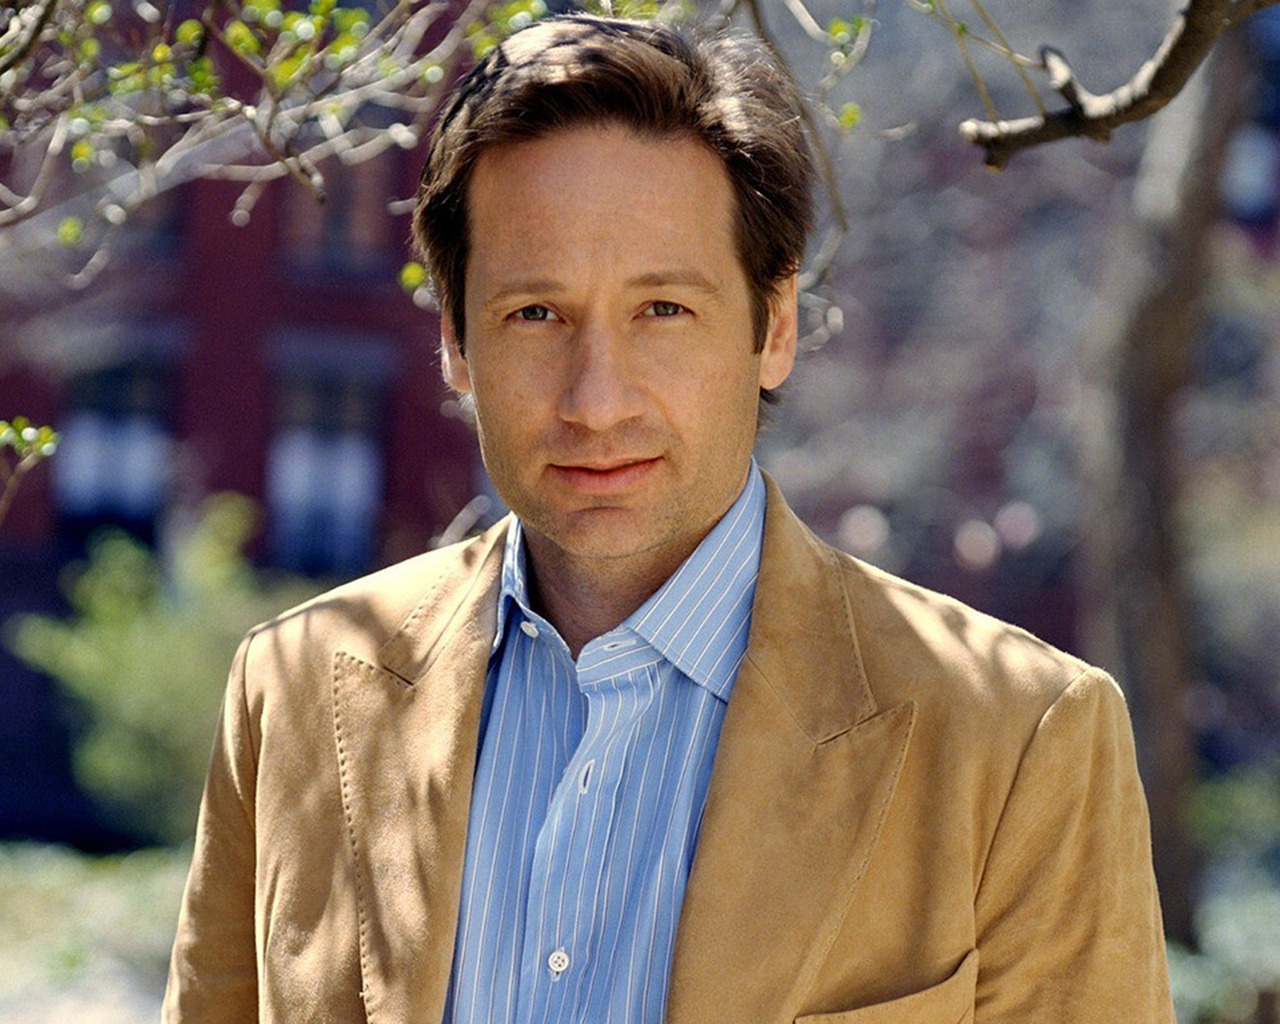 David Duchovny for 1280 x 1024 resolution